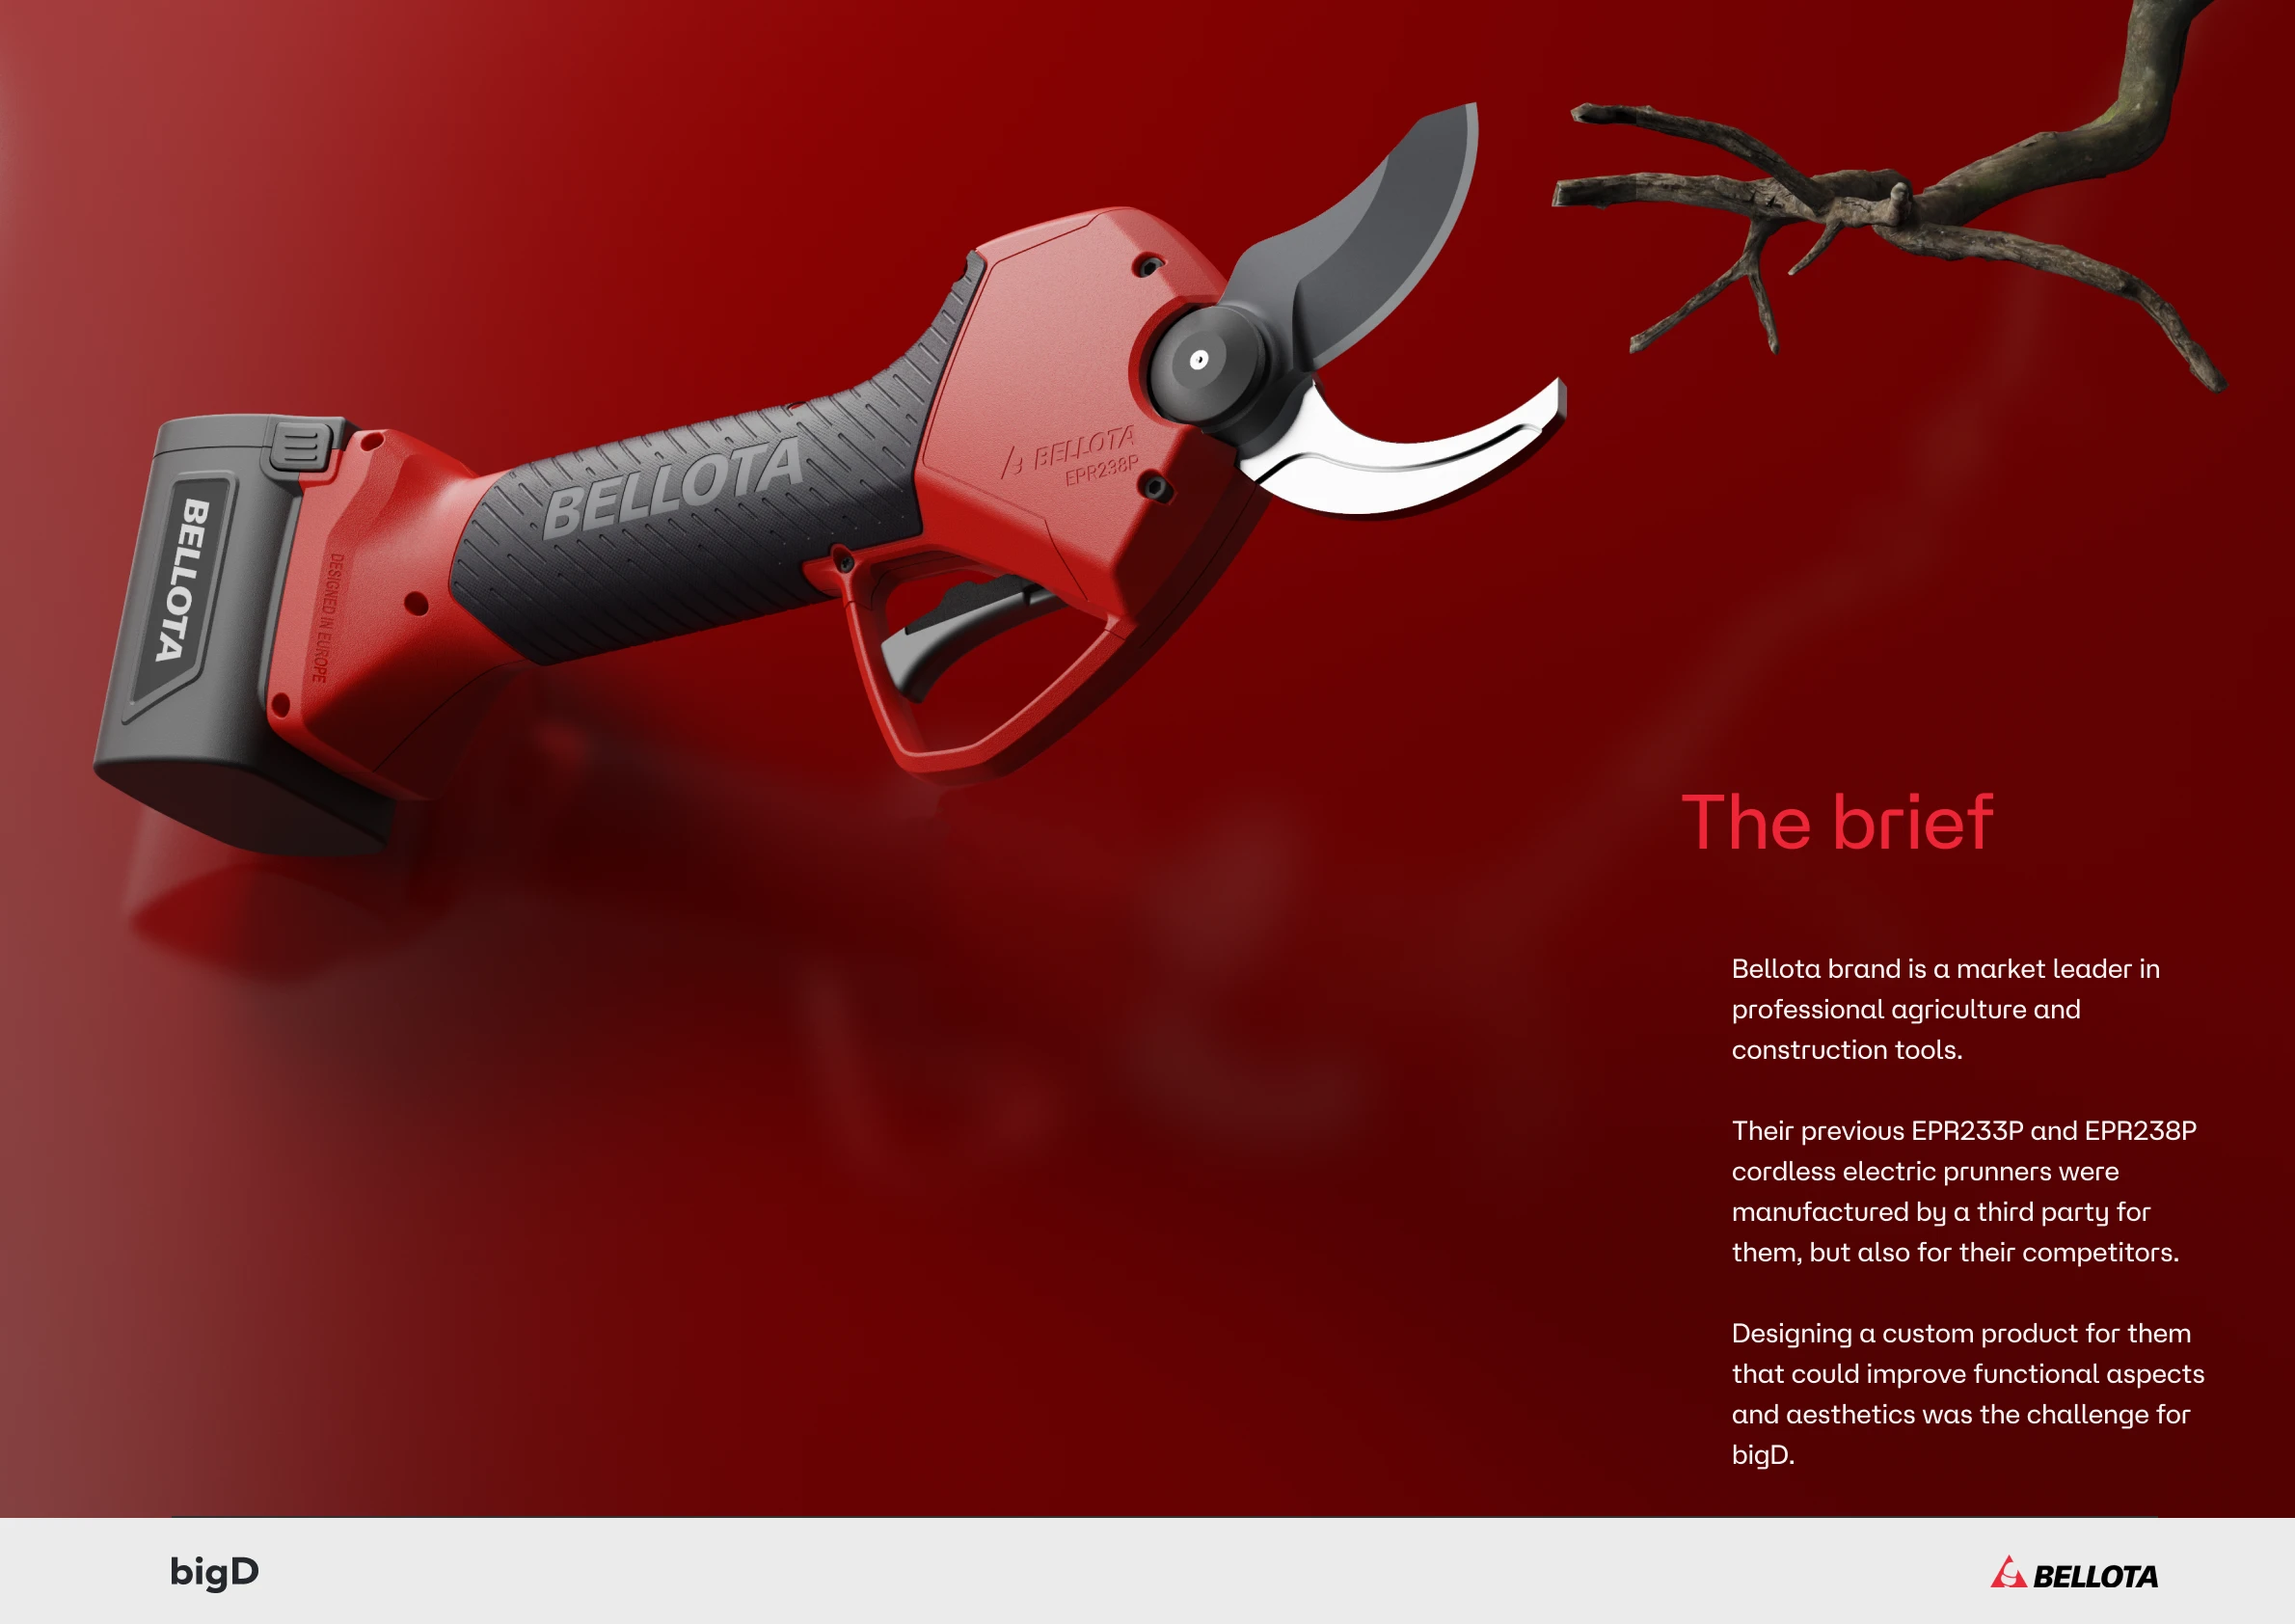 the brief, Bellota brand is a market leader in professional agriculture and construction tools